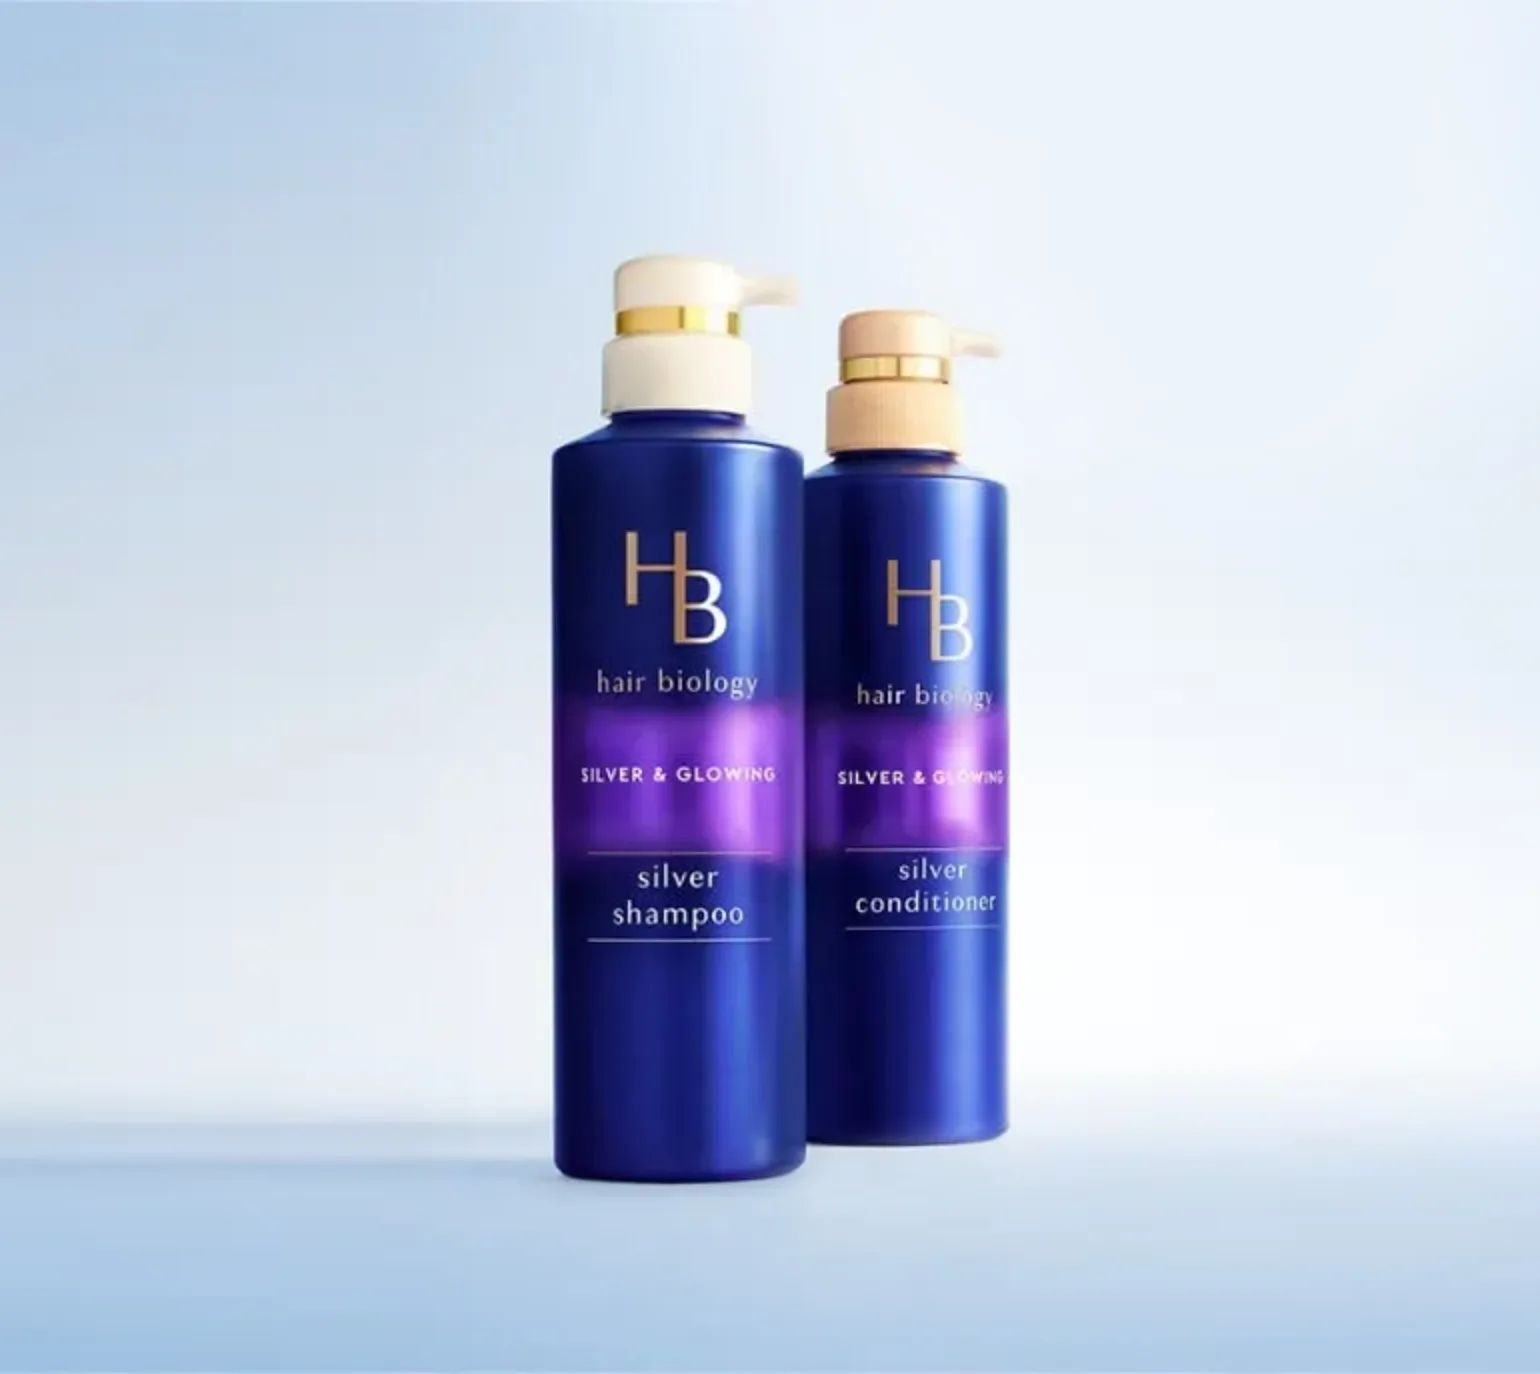 Hair Biology Silver and Glowing Serum shampoo and Conditioner